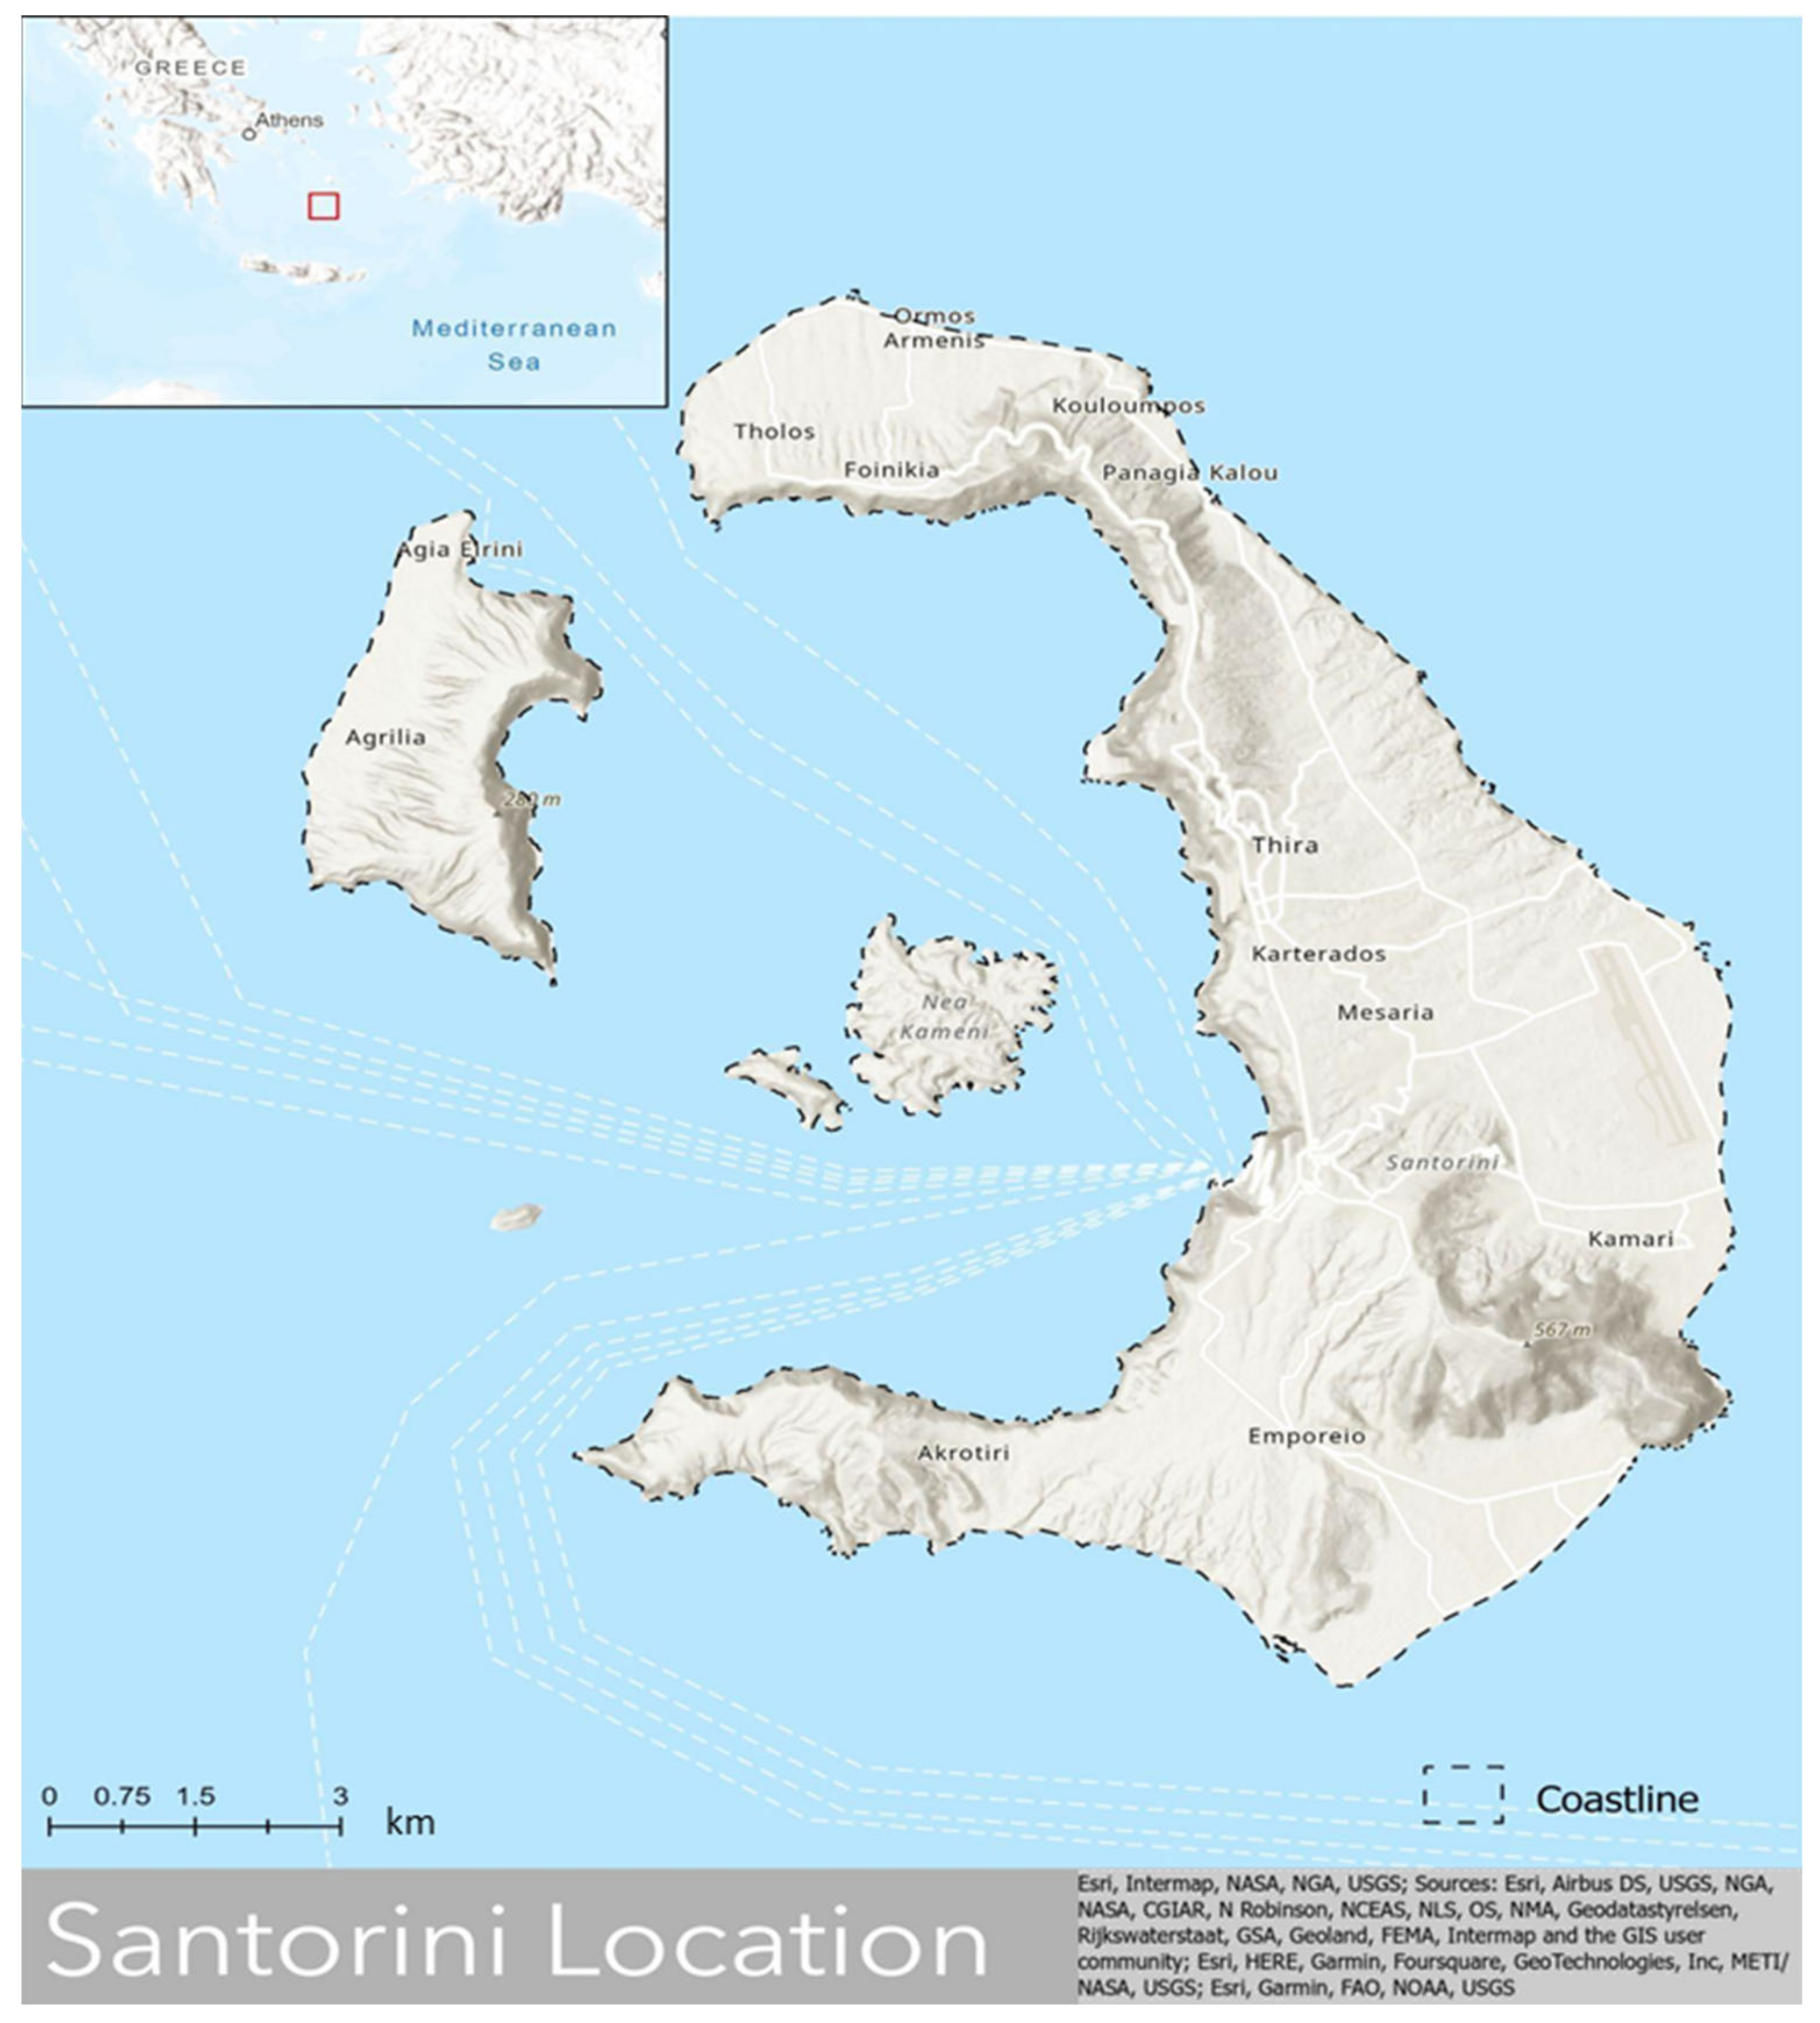 Geomatics | Free Full-Text | Geospatial Intelligence and Machine Learning  Technique for Urban Mapping in Coastal Regions of South Aegean Volcanic Arc  Islands